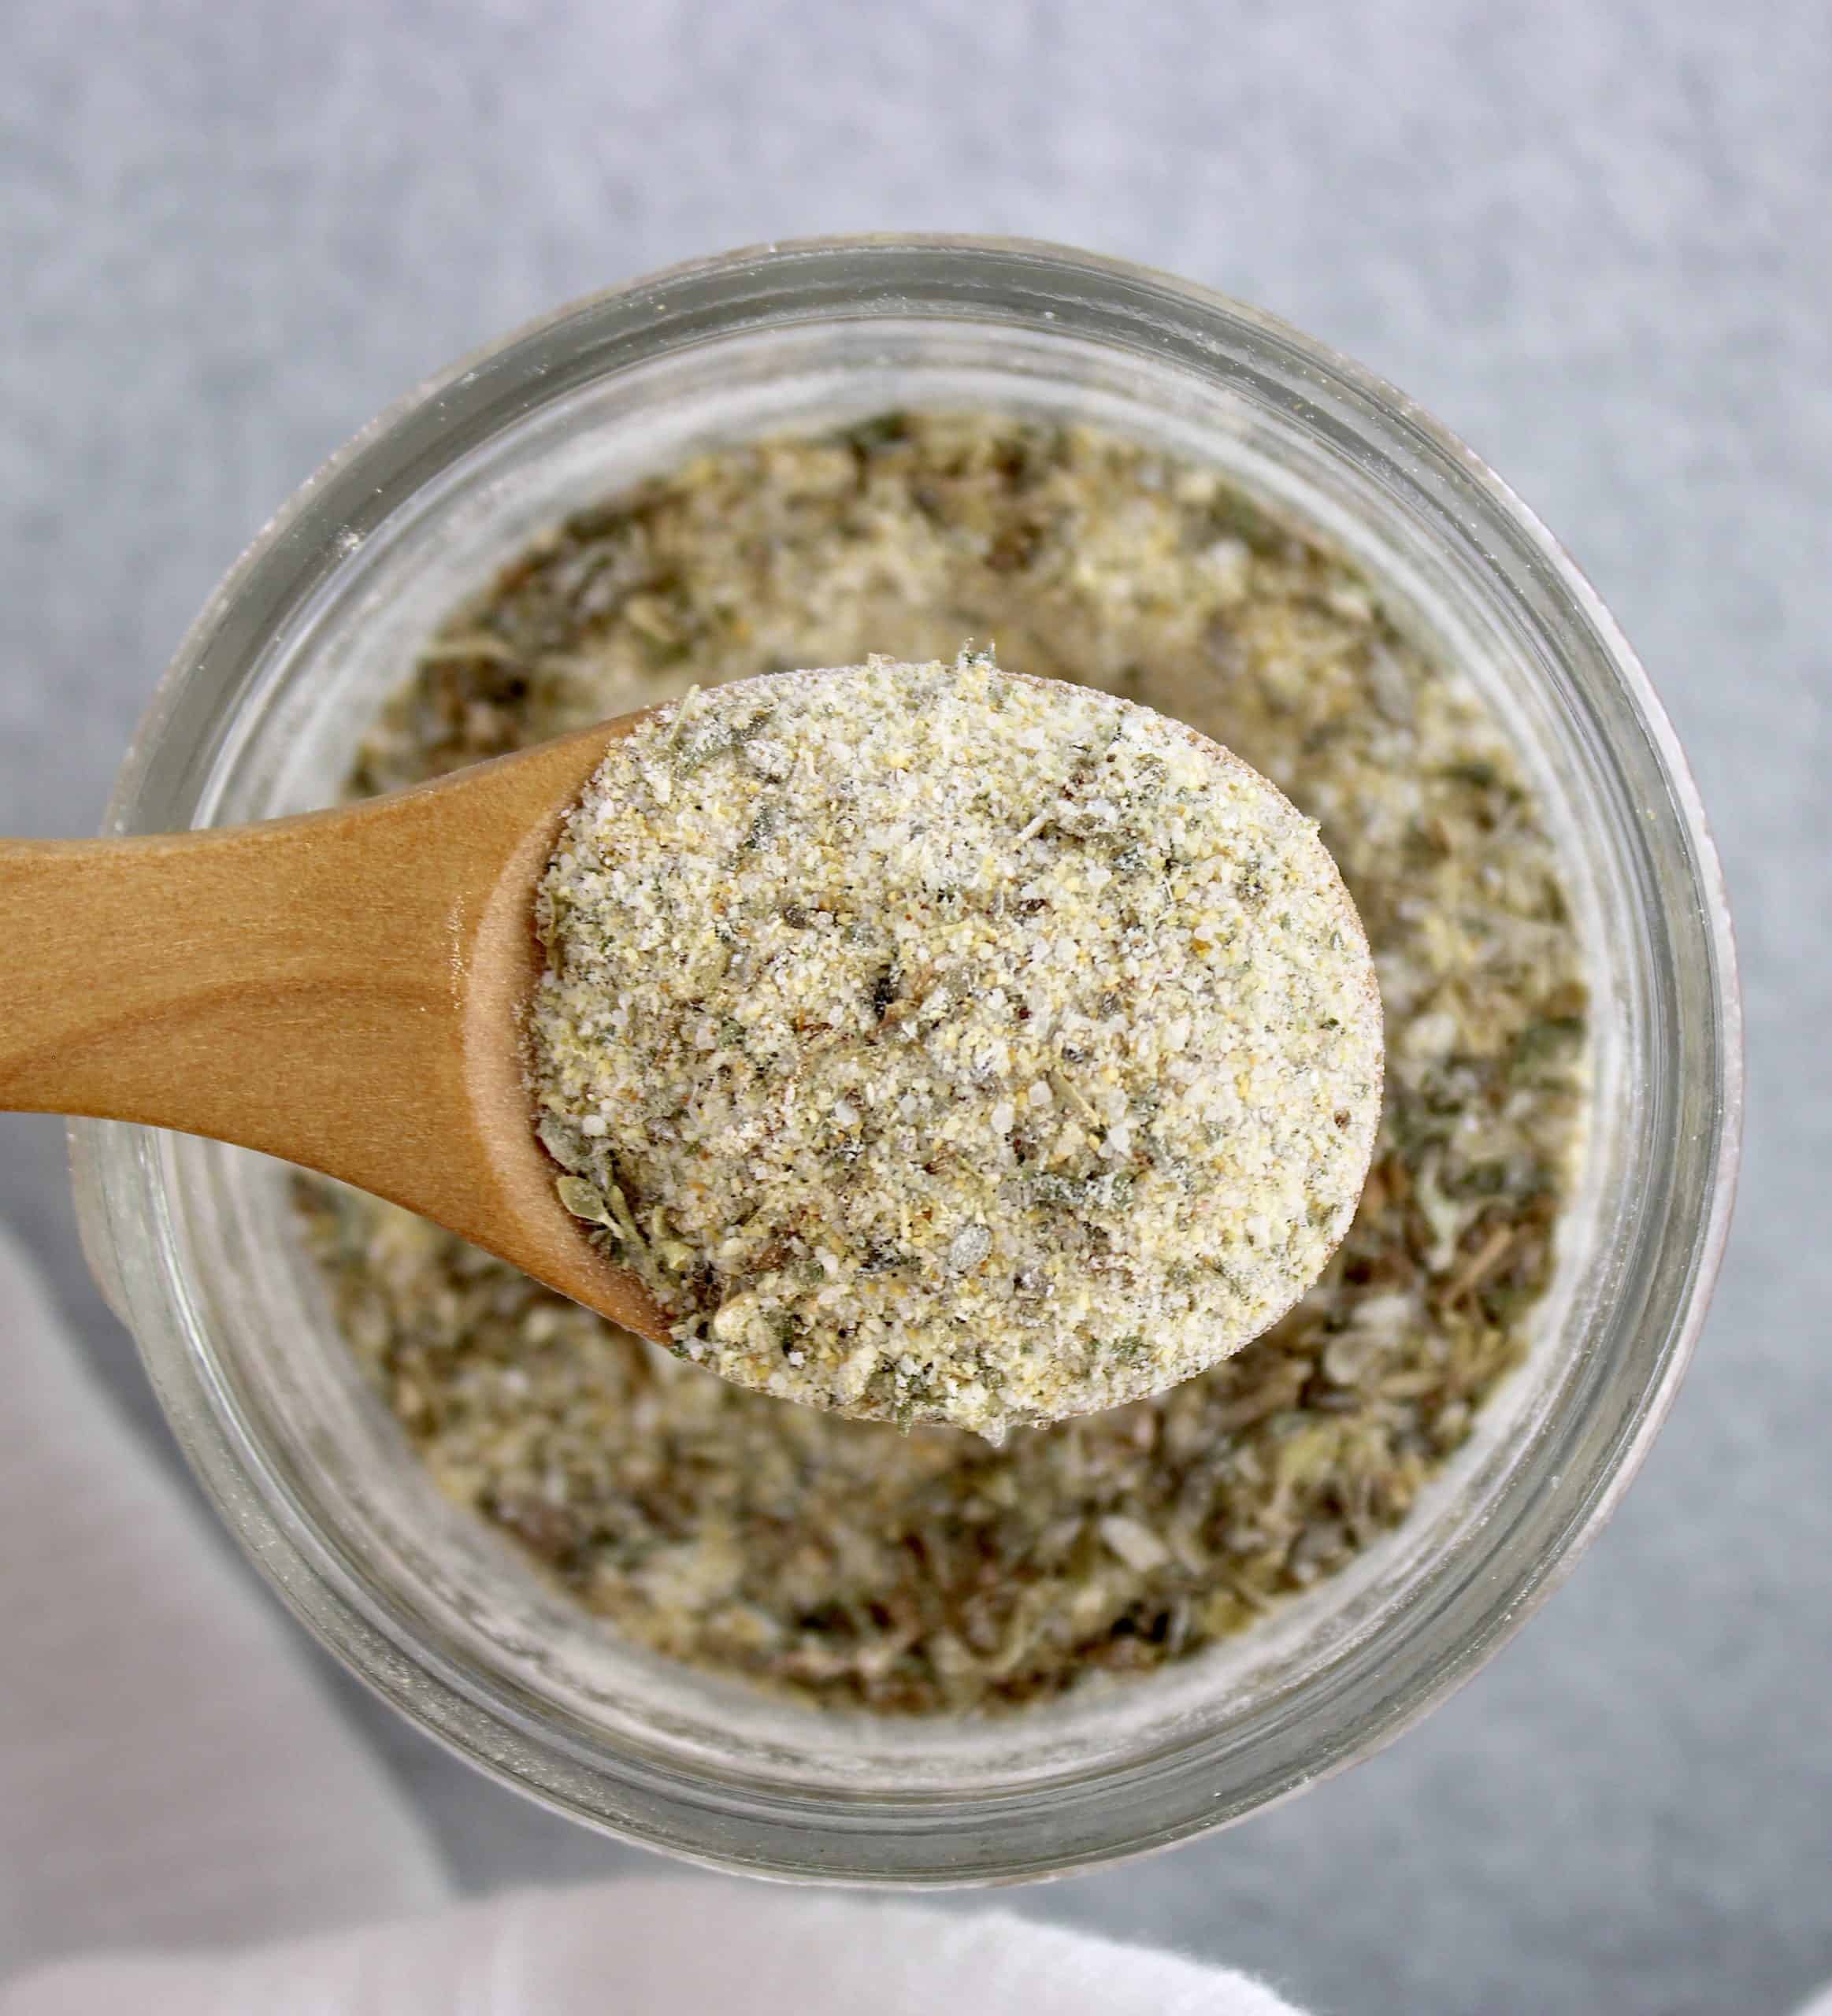 Homemade Italian Dressing Mix being held up by wooden spoon over open glass jar